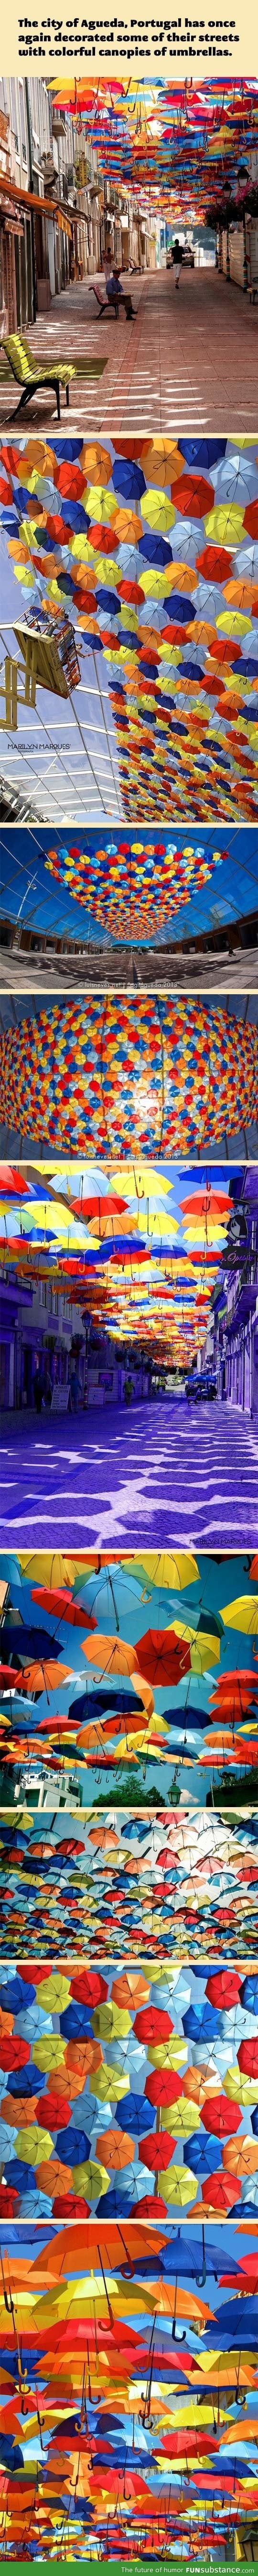 Colourful umbrella shelters the streets of Portugal